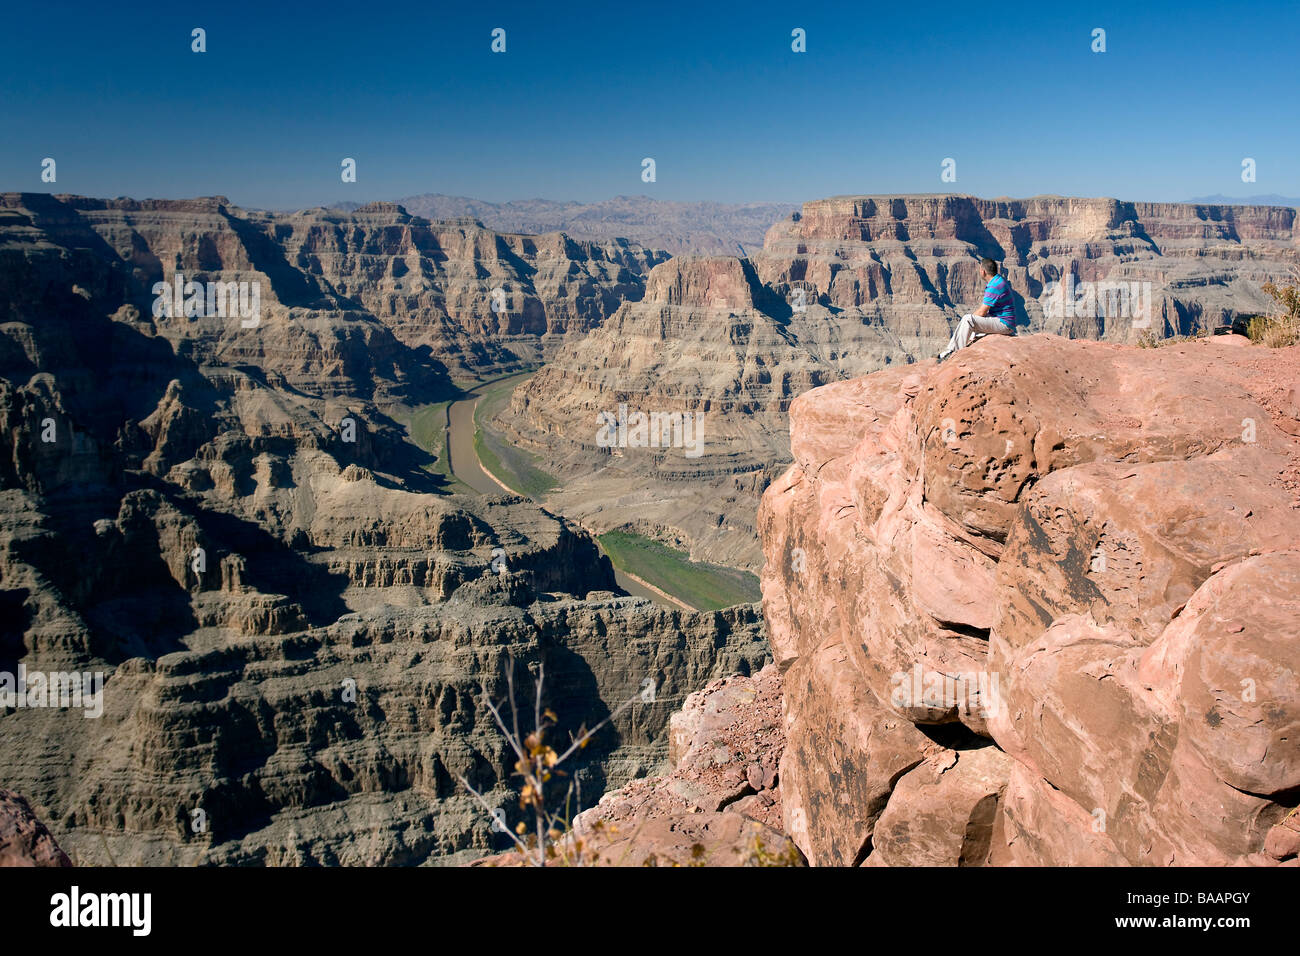 A Man Person Looks Out Over The Grand Canyon Arizona United States USA Stock Photo